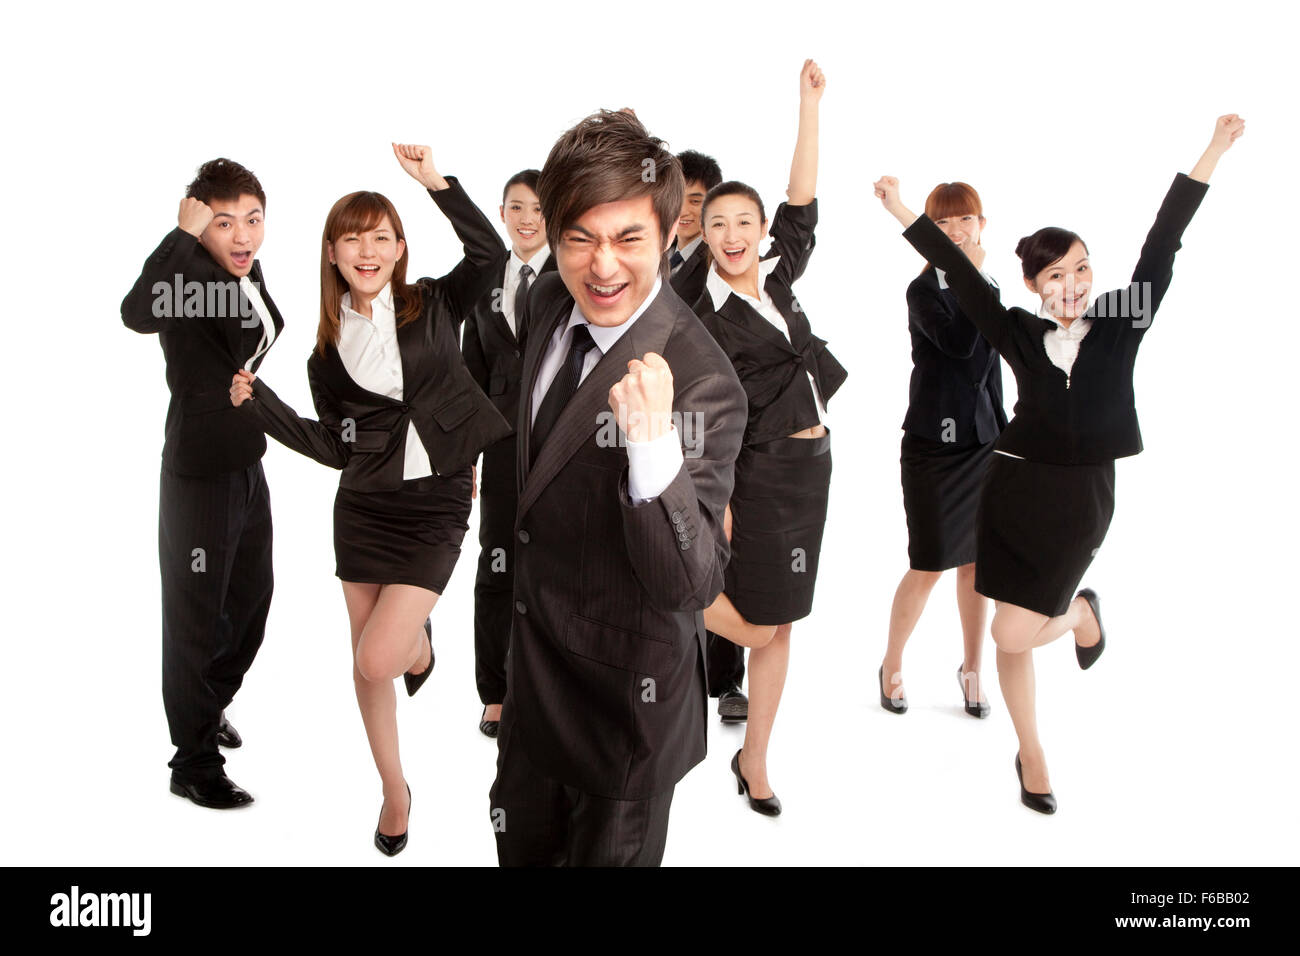 A group of business people holding umbrella Stock Photo